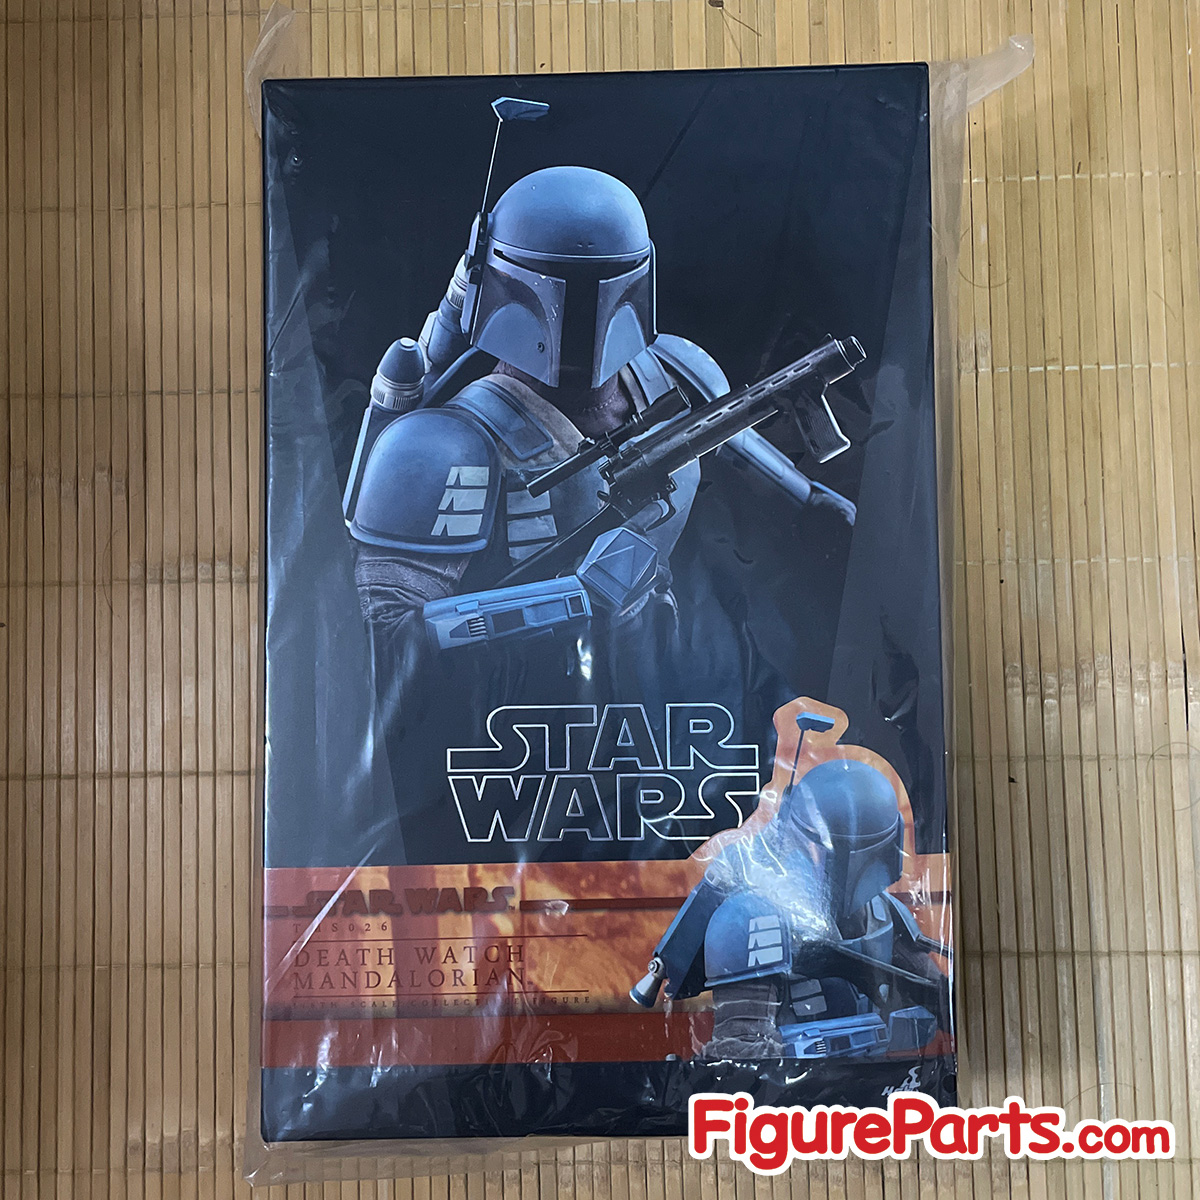 Death Watch - Star Wars The Mandalorian - Hot Toys tms026